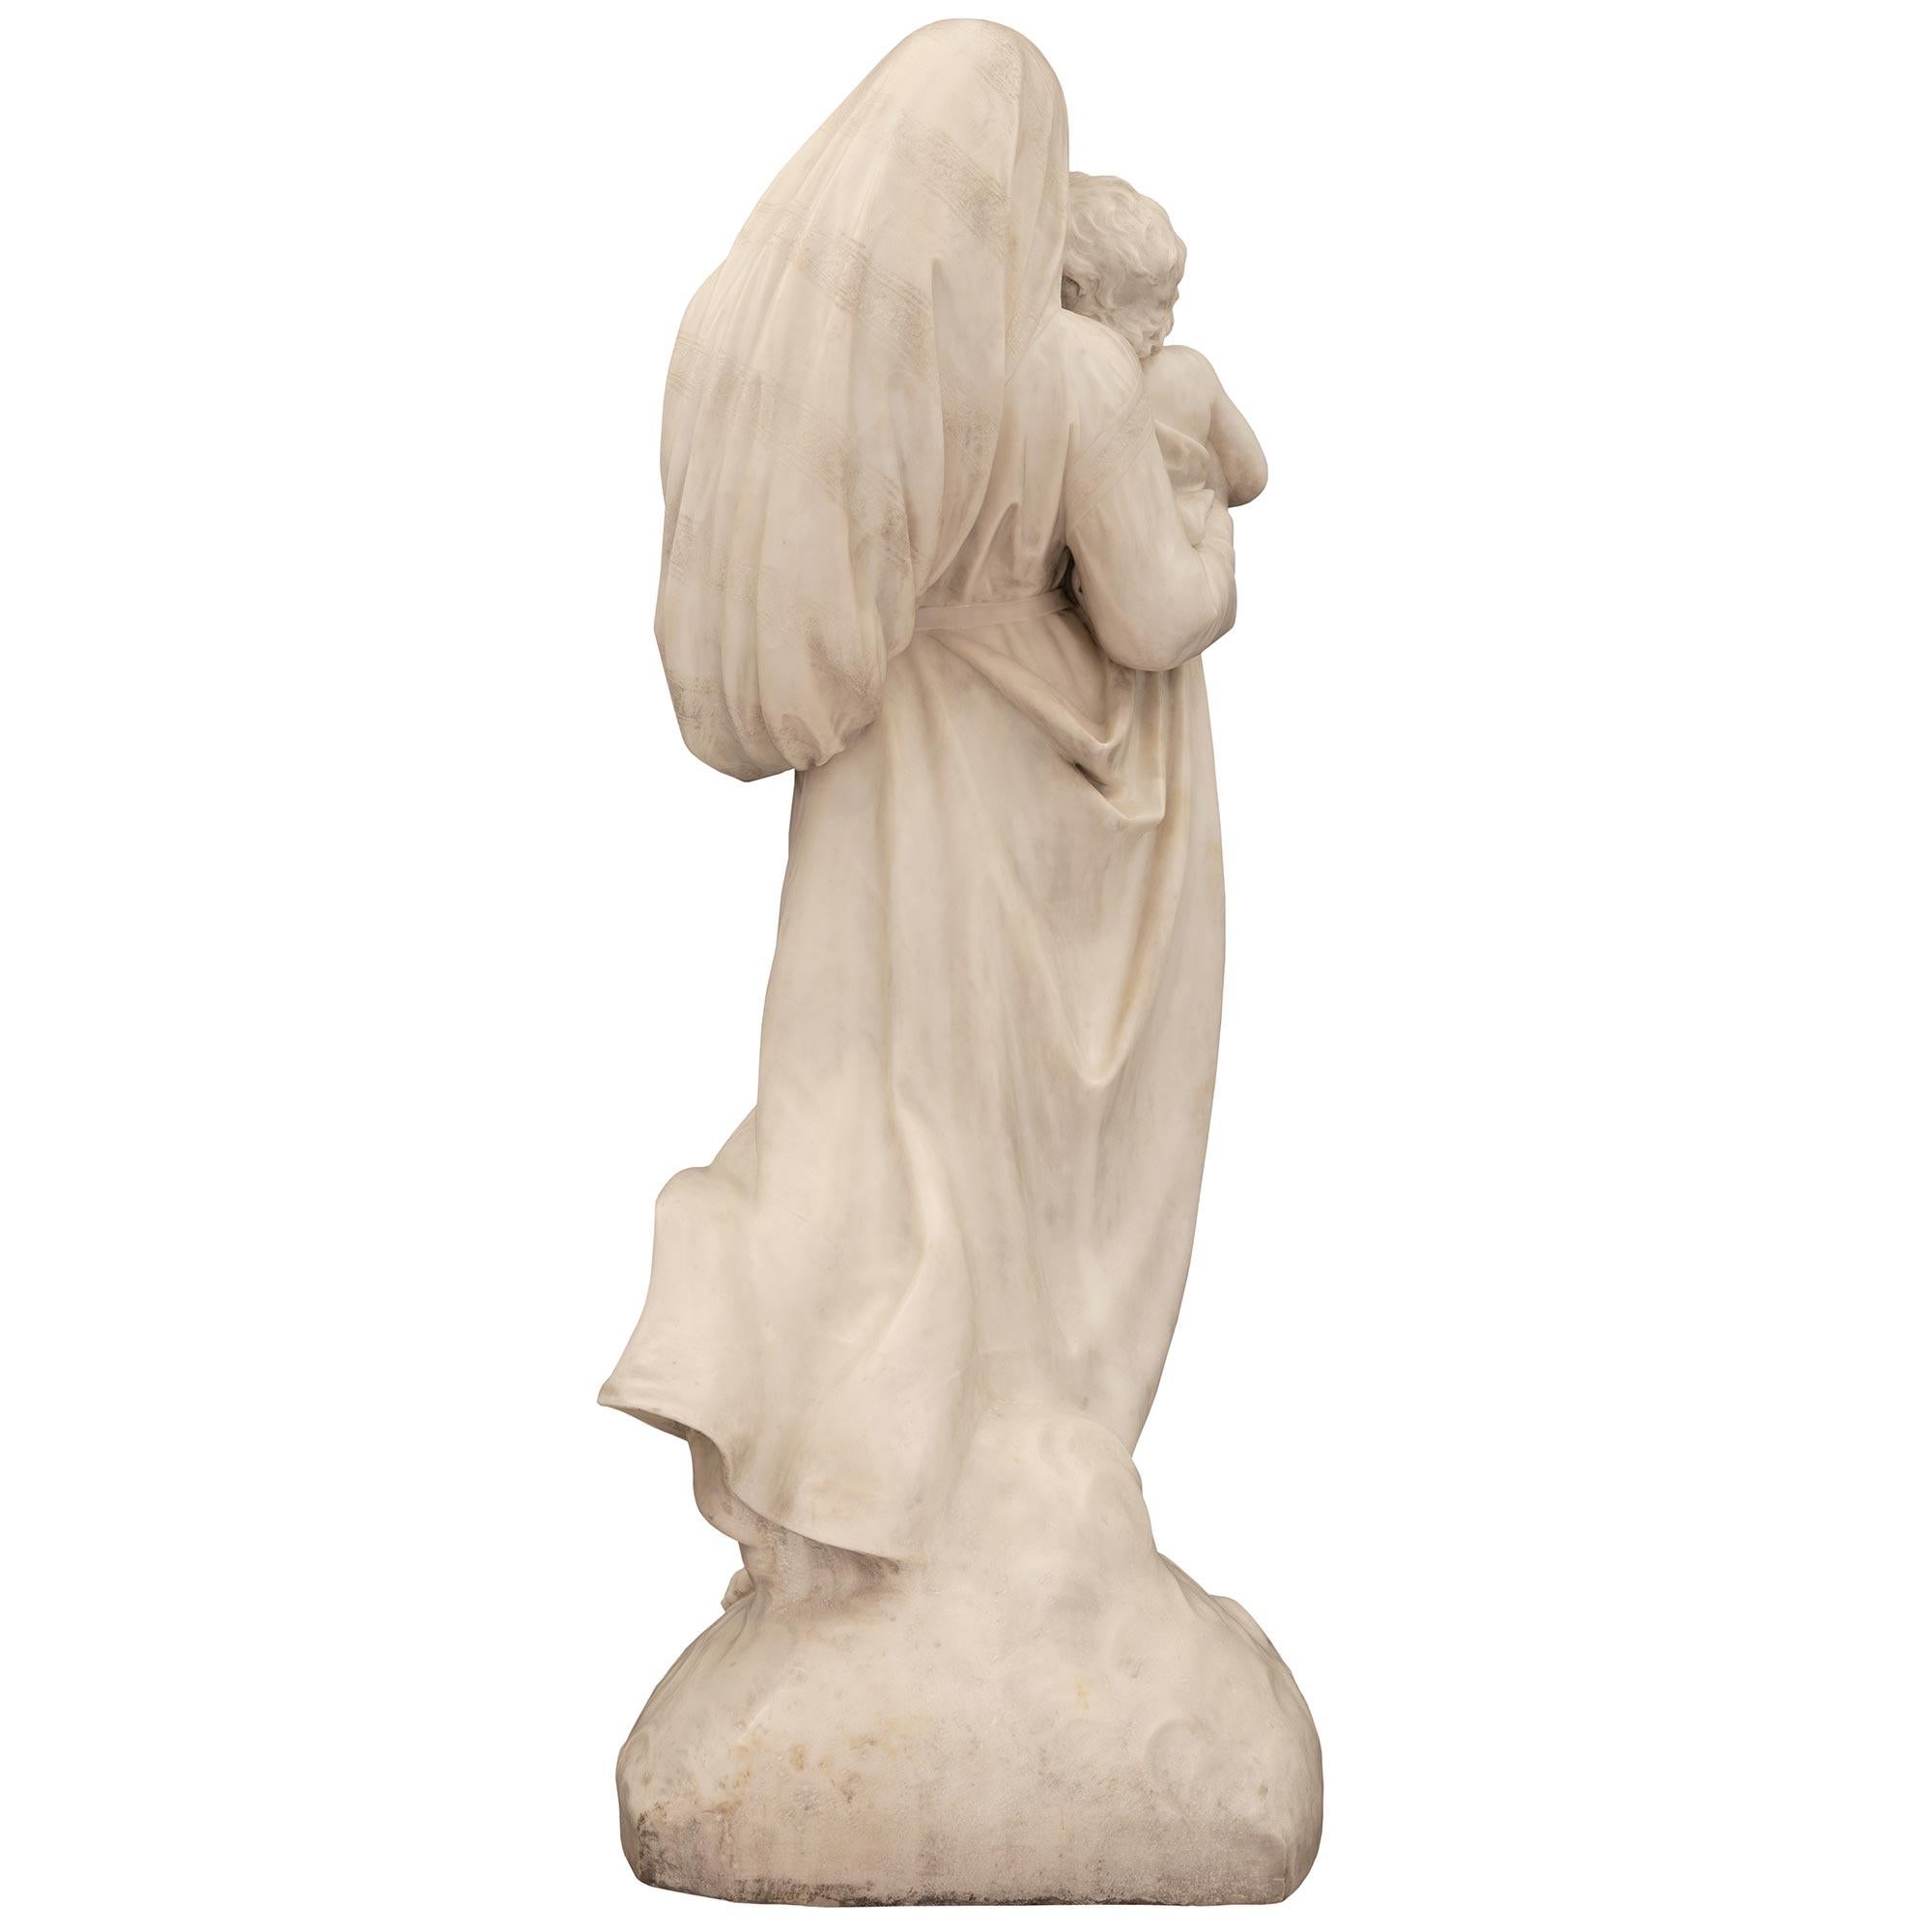 Italian 19th Century White Carrara Marble Life-Size Statue of Madonna and Child For Sale 7